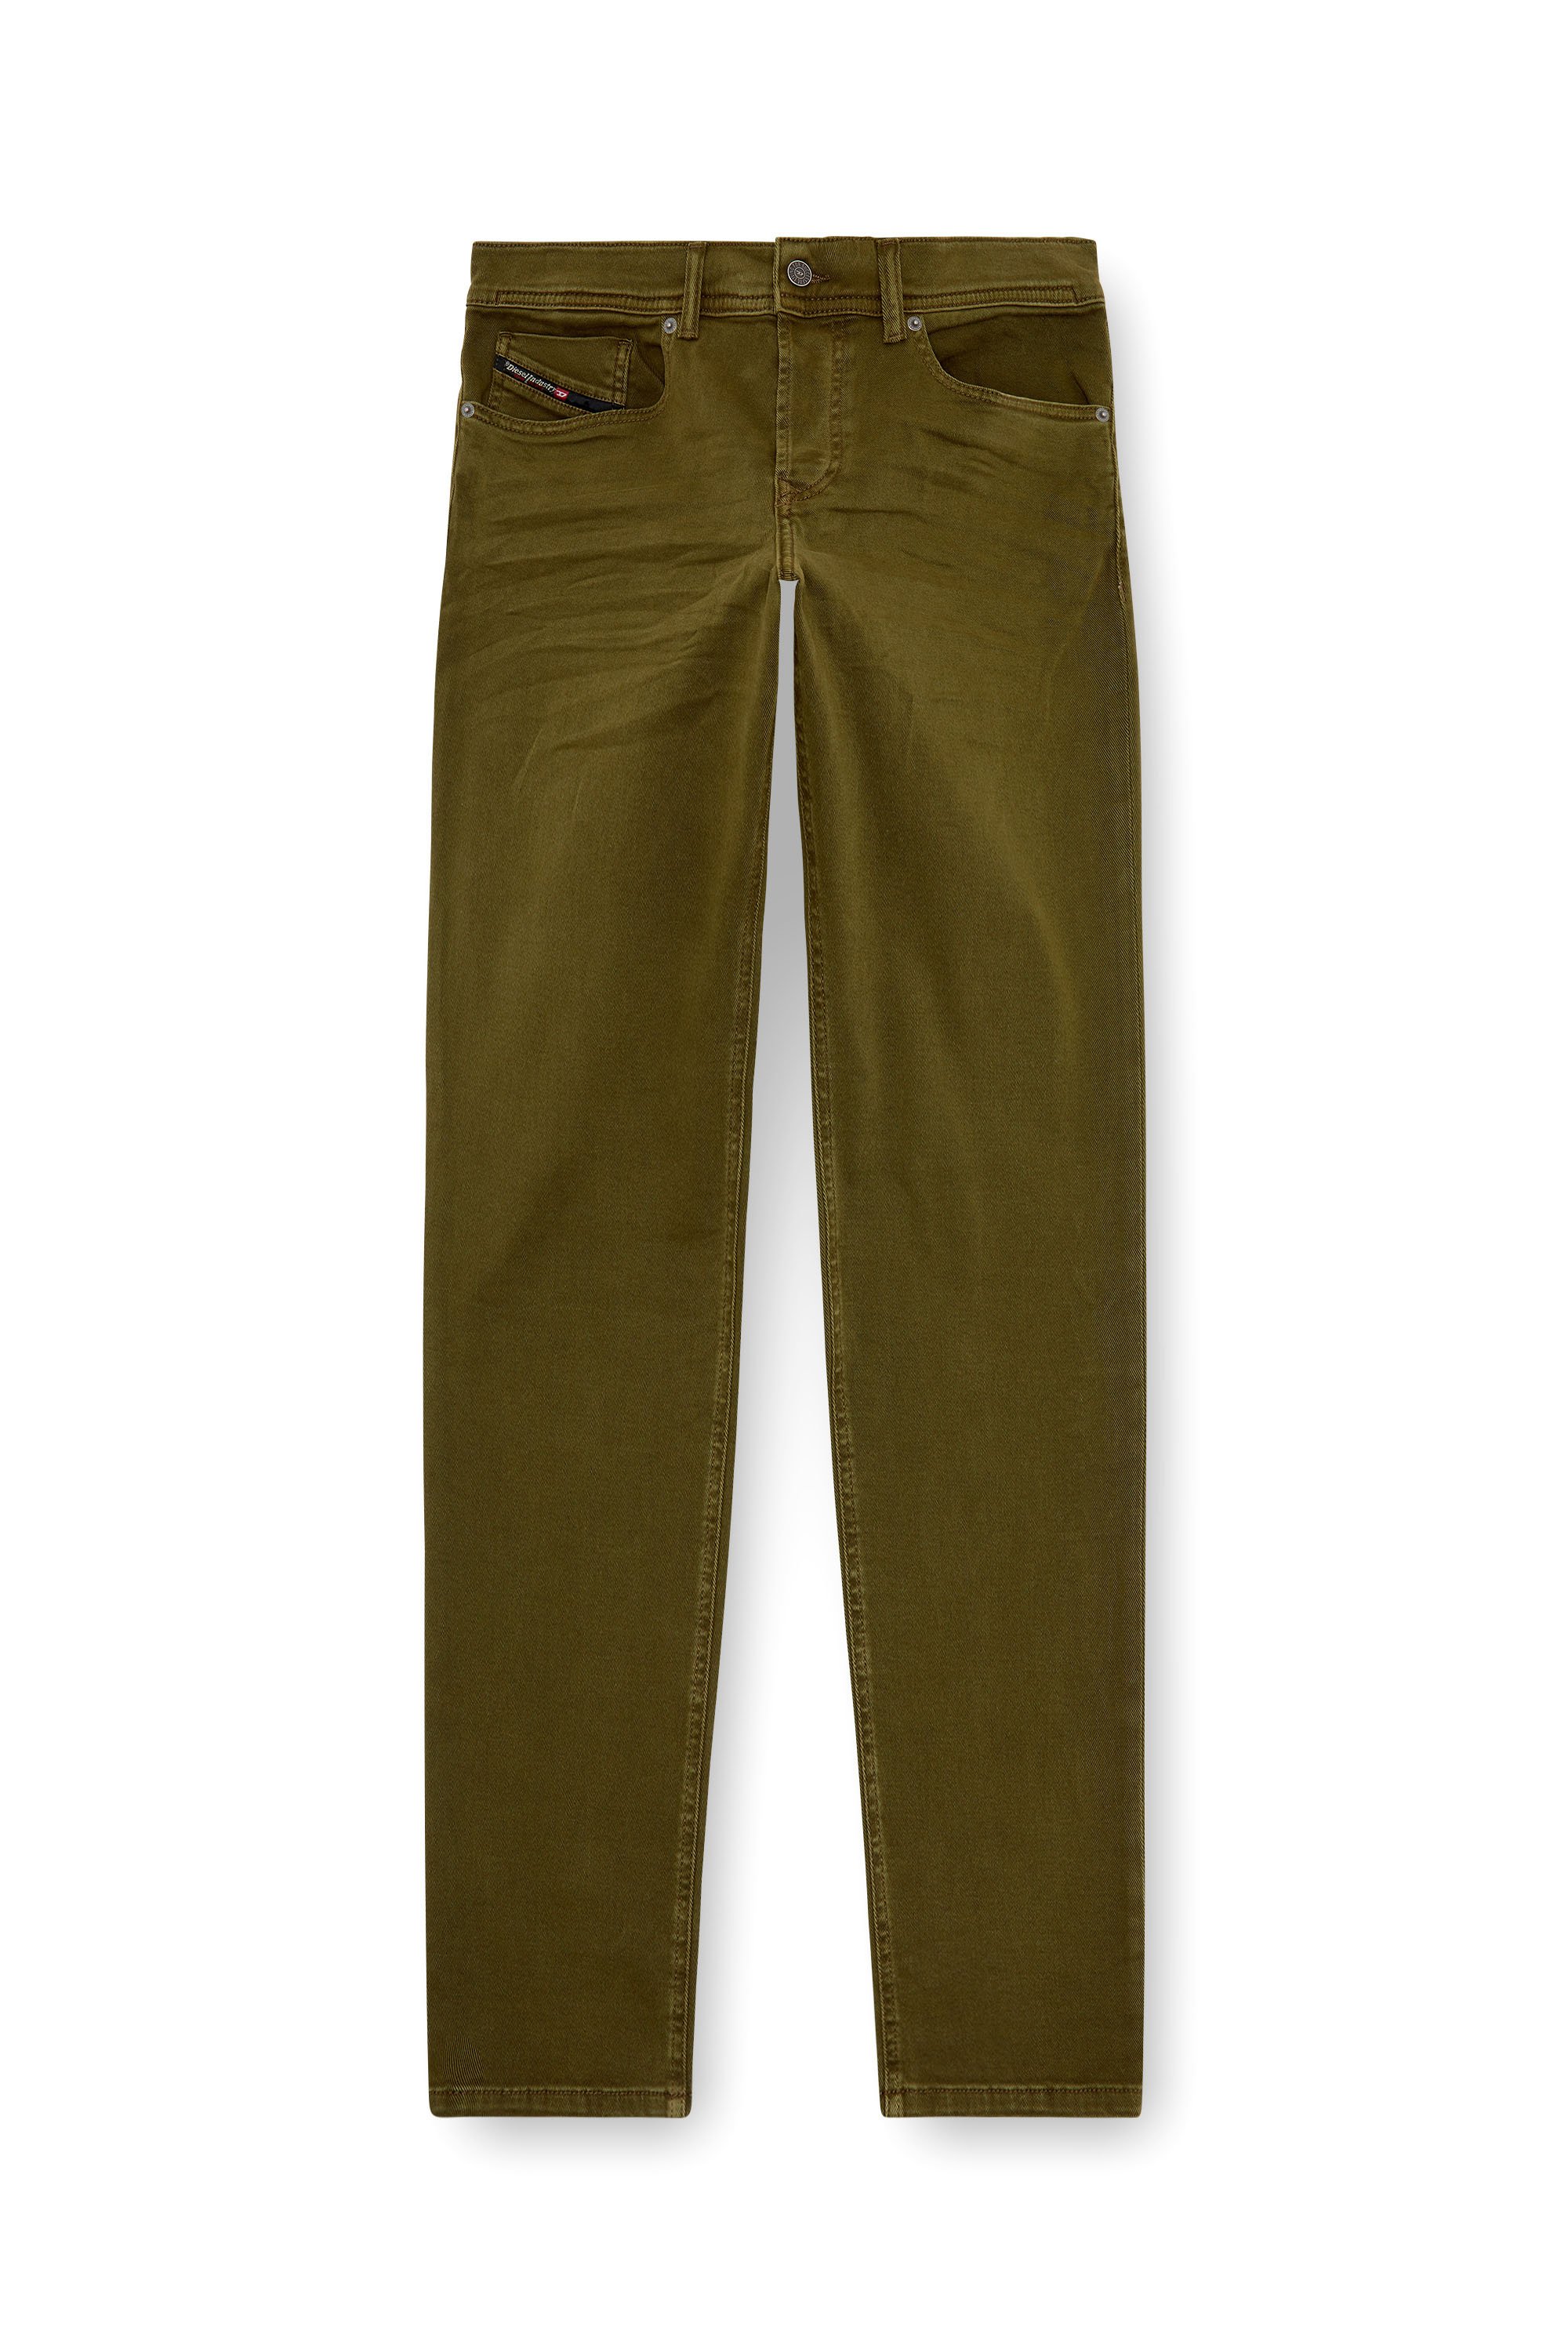 Diesel - Tapered Jeans 2023 D-Finitive 0QWTY, Hombre Tapered Jeans - 2023 D-Finitive in Verde - Image 3